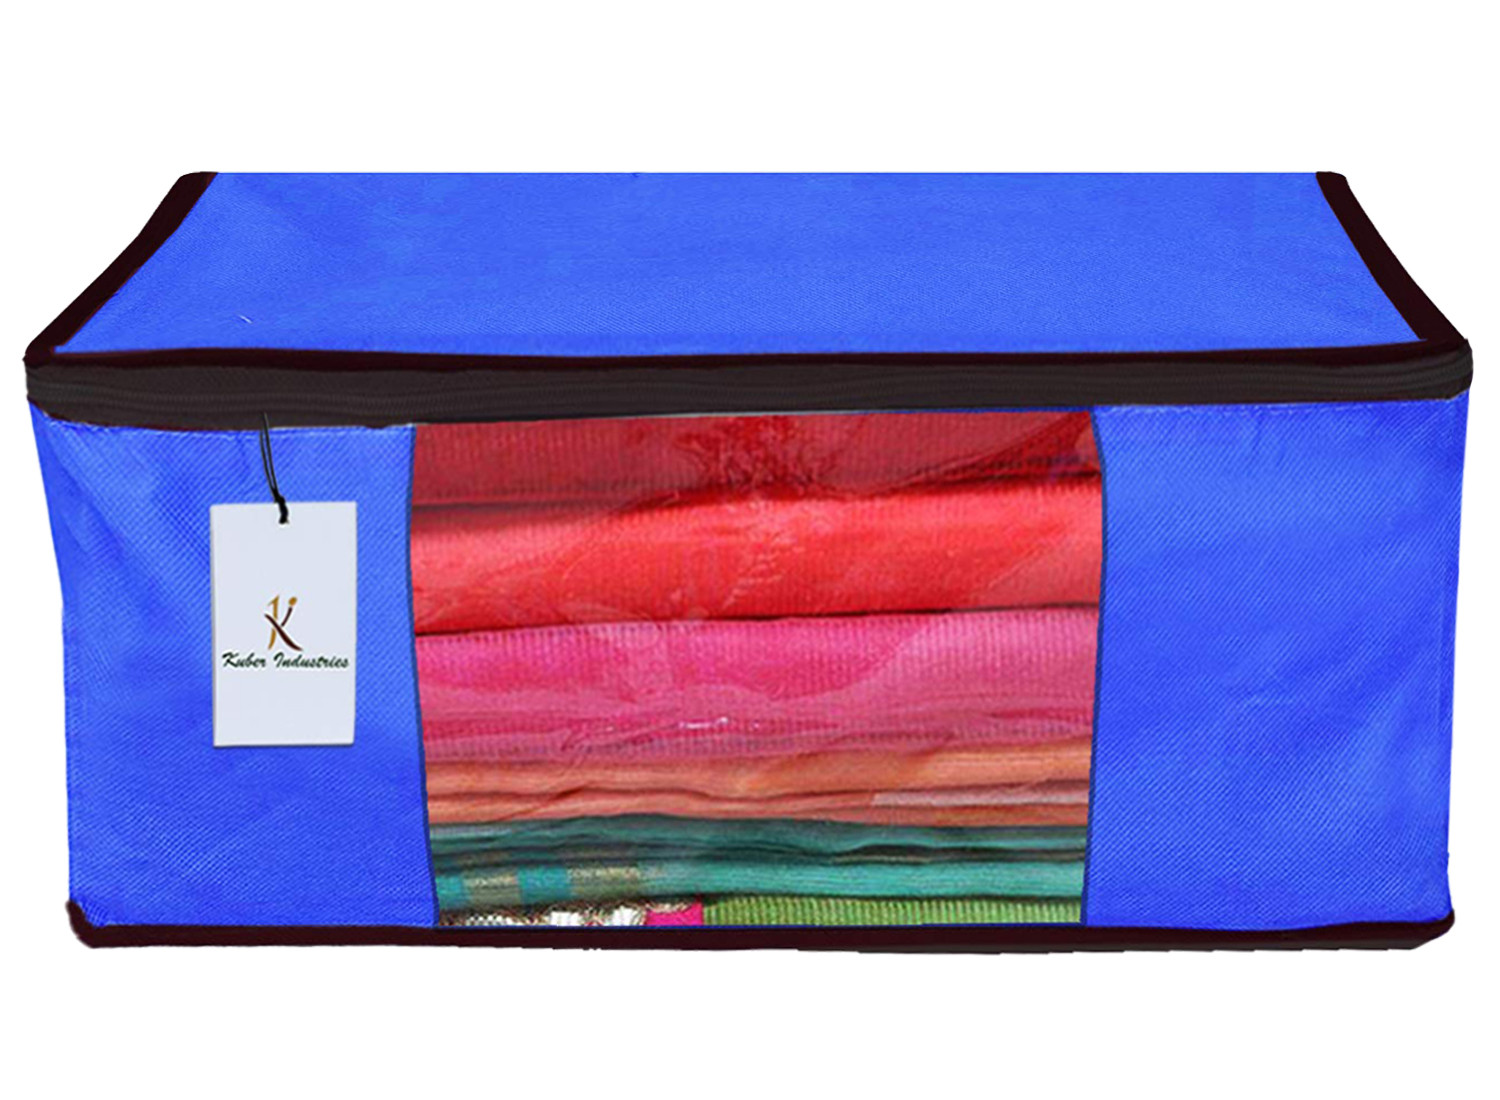 Kuber Industries Non Woven Saree Cover And Underbed Storage Bag, Cloth Organizer For Storage, Blanket Cover Combo Set (Royal Blue) -CTKTC38487